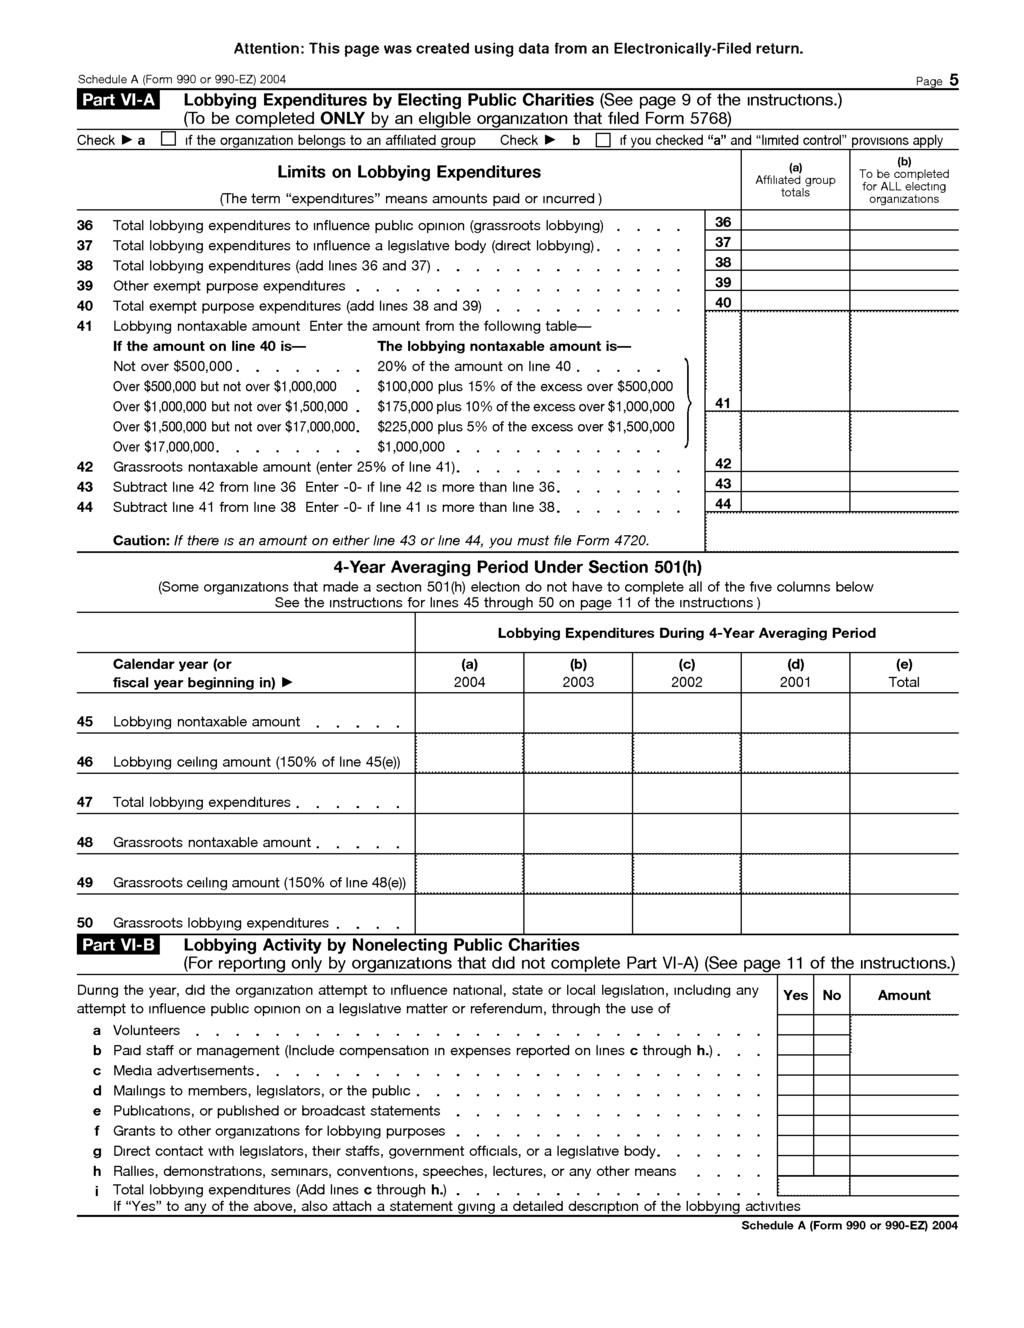 Schedule A (Form 990 or 990-EZ) 2004 Page 5 Lobbying Expenditures by Electing Public Charities (See page 9 of the instructions.